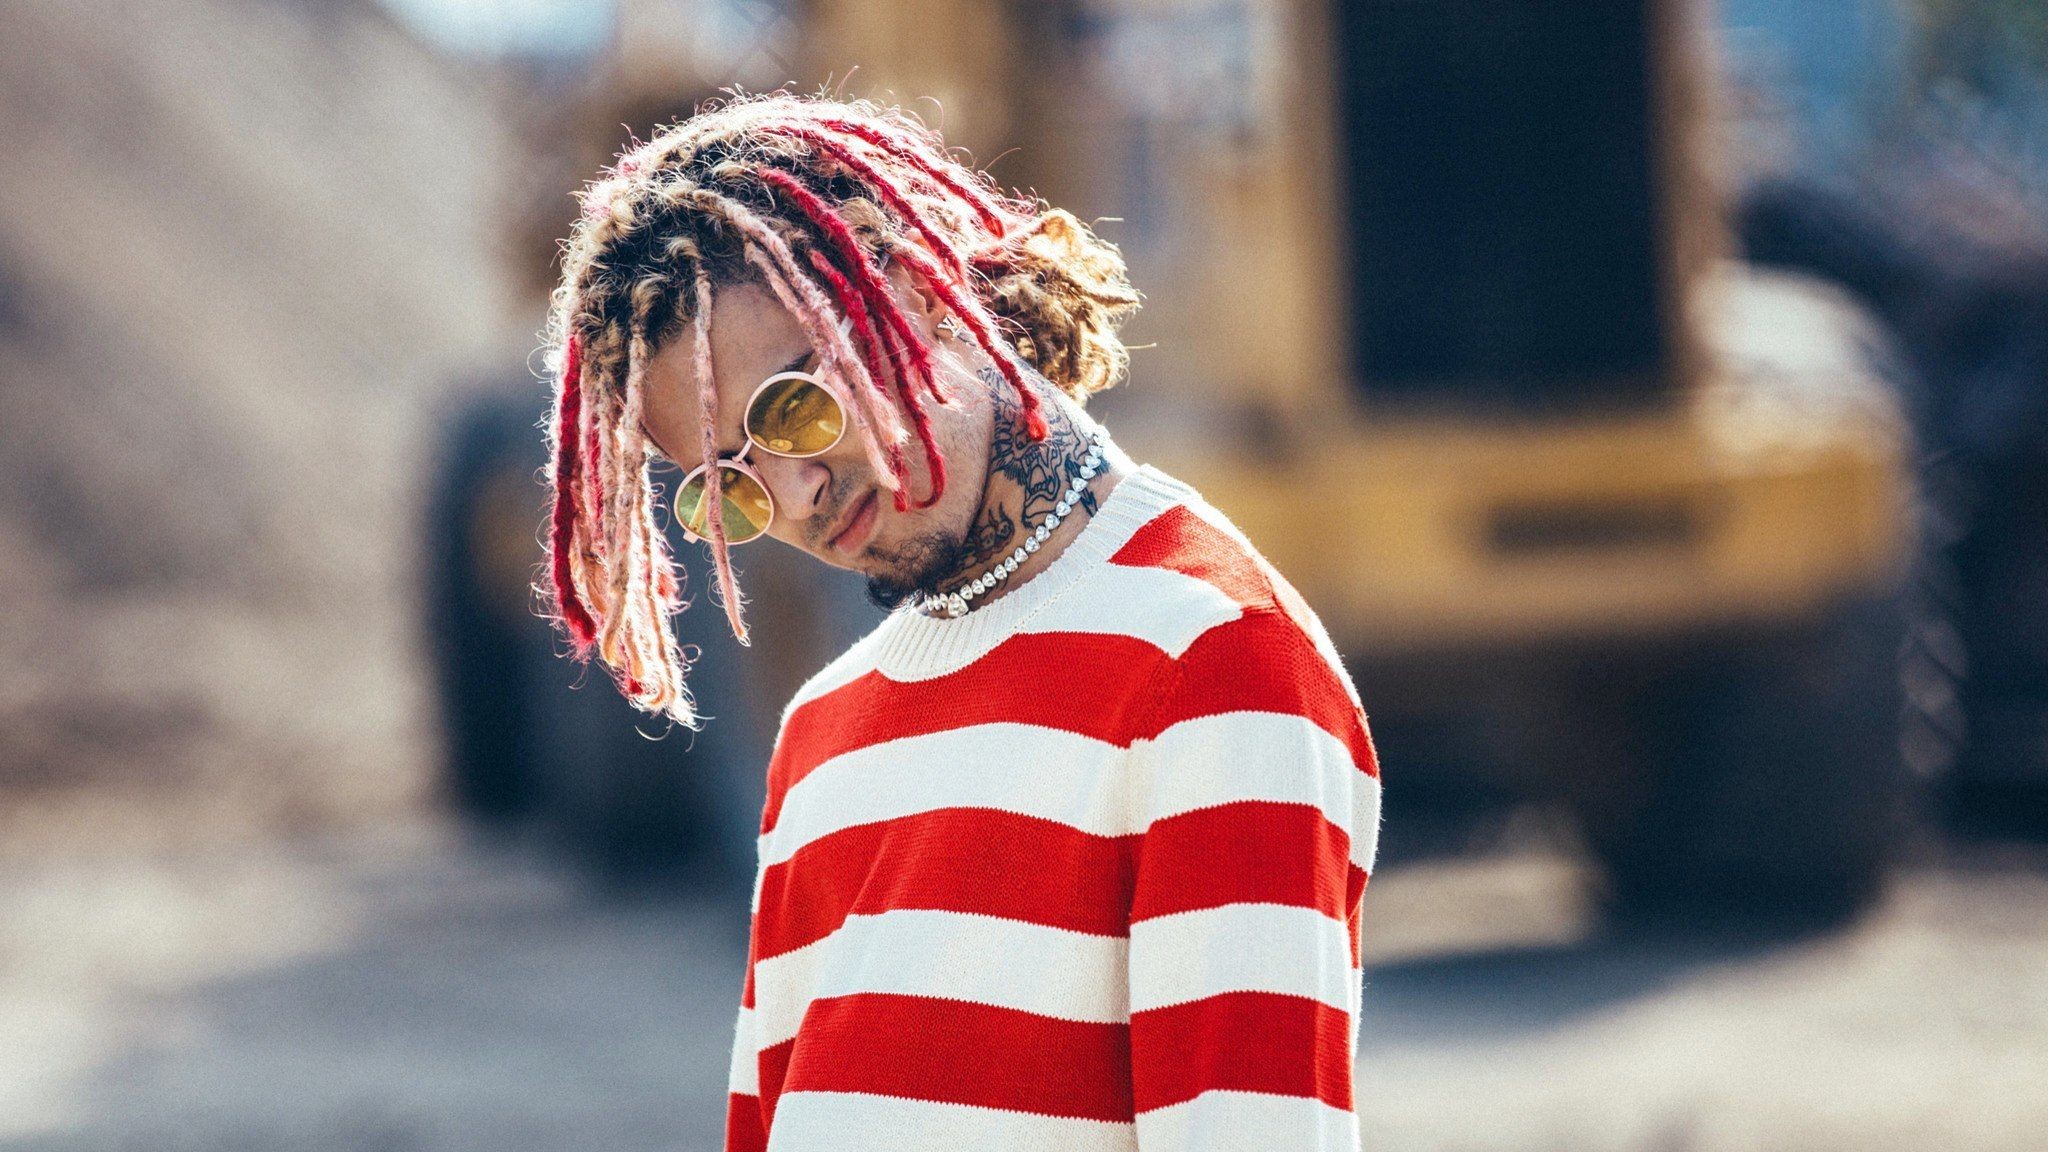 Lil Pump Wallpapers 74 Pictures